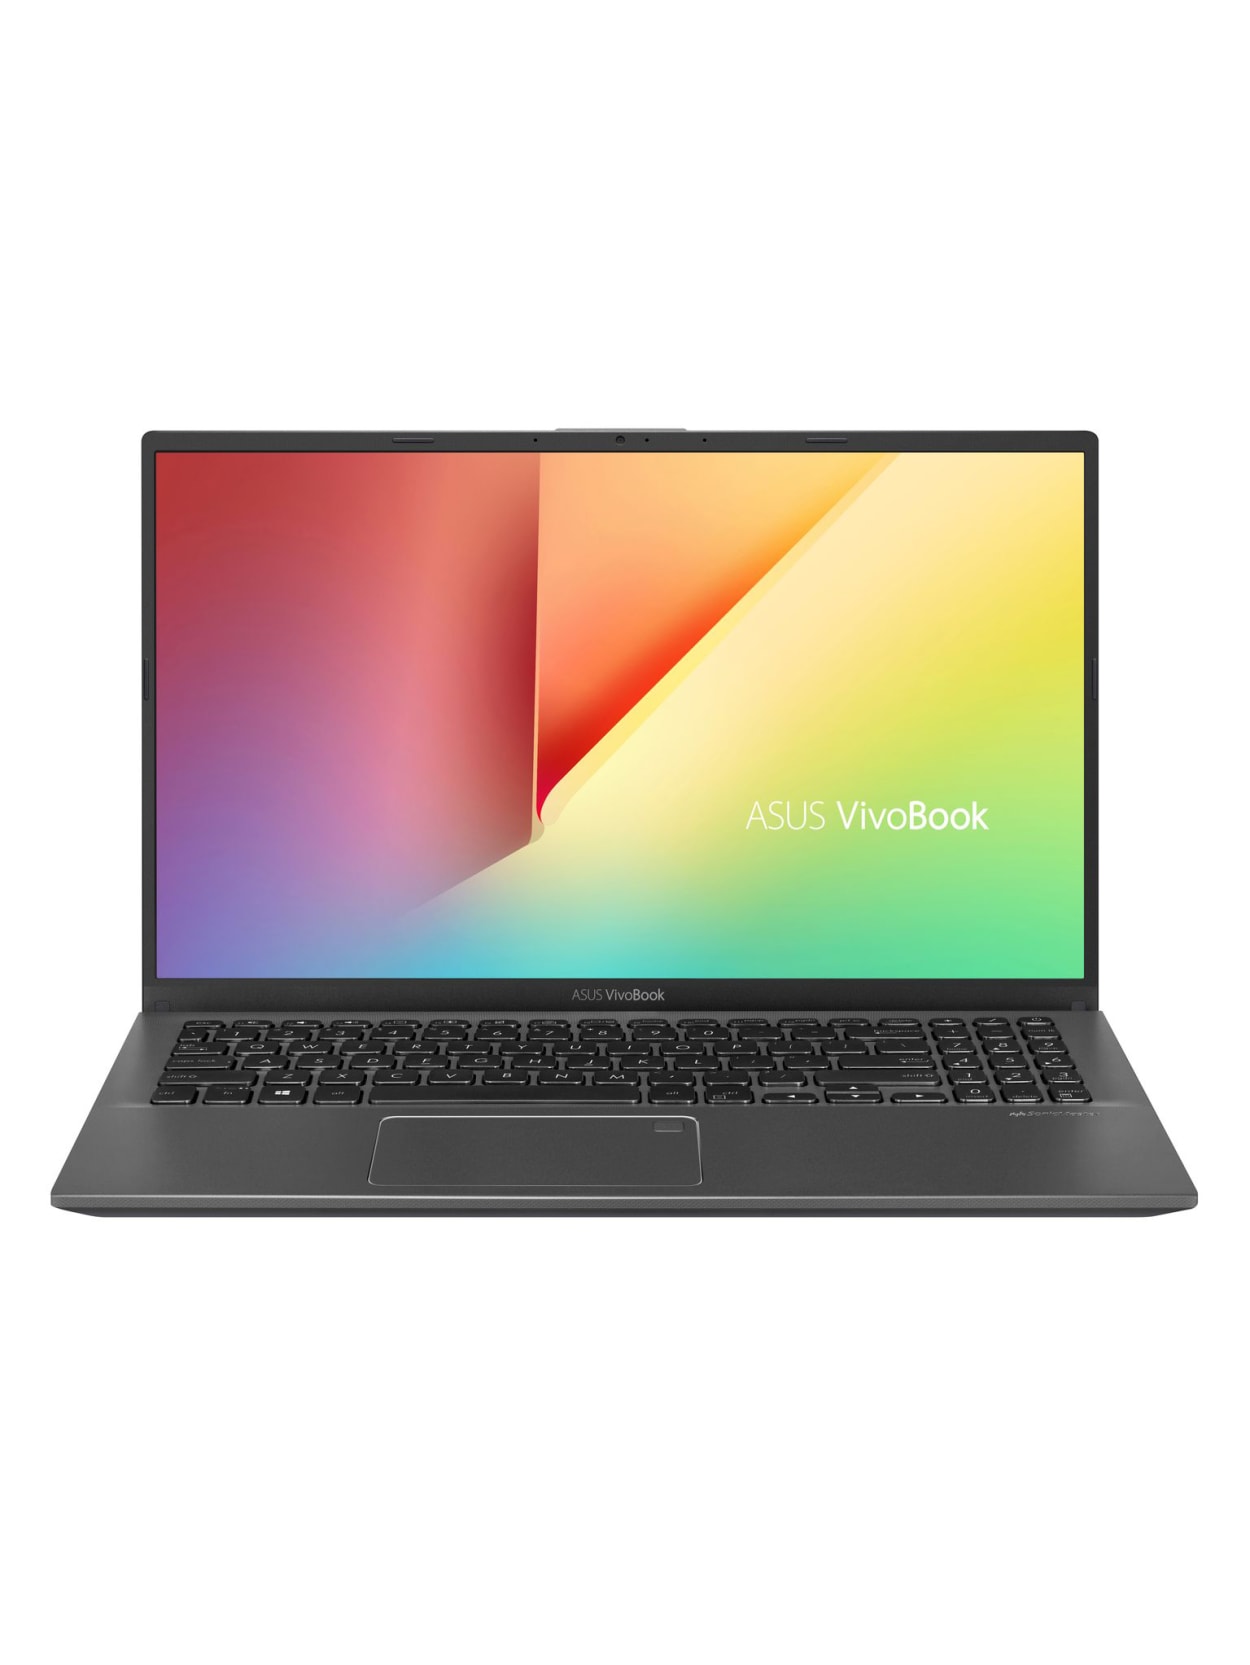 $319.99 At Office Depot Deal Of The Day: ASUS® VivoBook 15 Laptop, 15.6" Screen, Intel® Core™ i3, 8GB Memory, 256GB Solid State Drive, Windows® 10, F512JA-OH36. Free Ship.